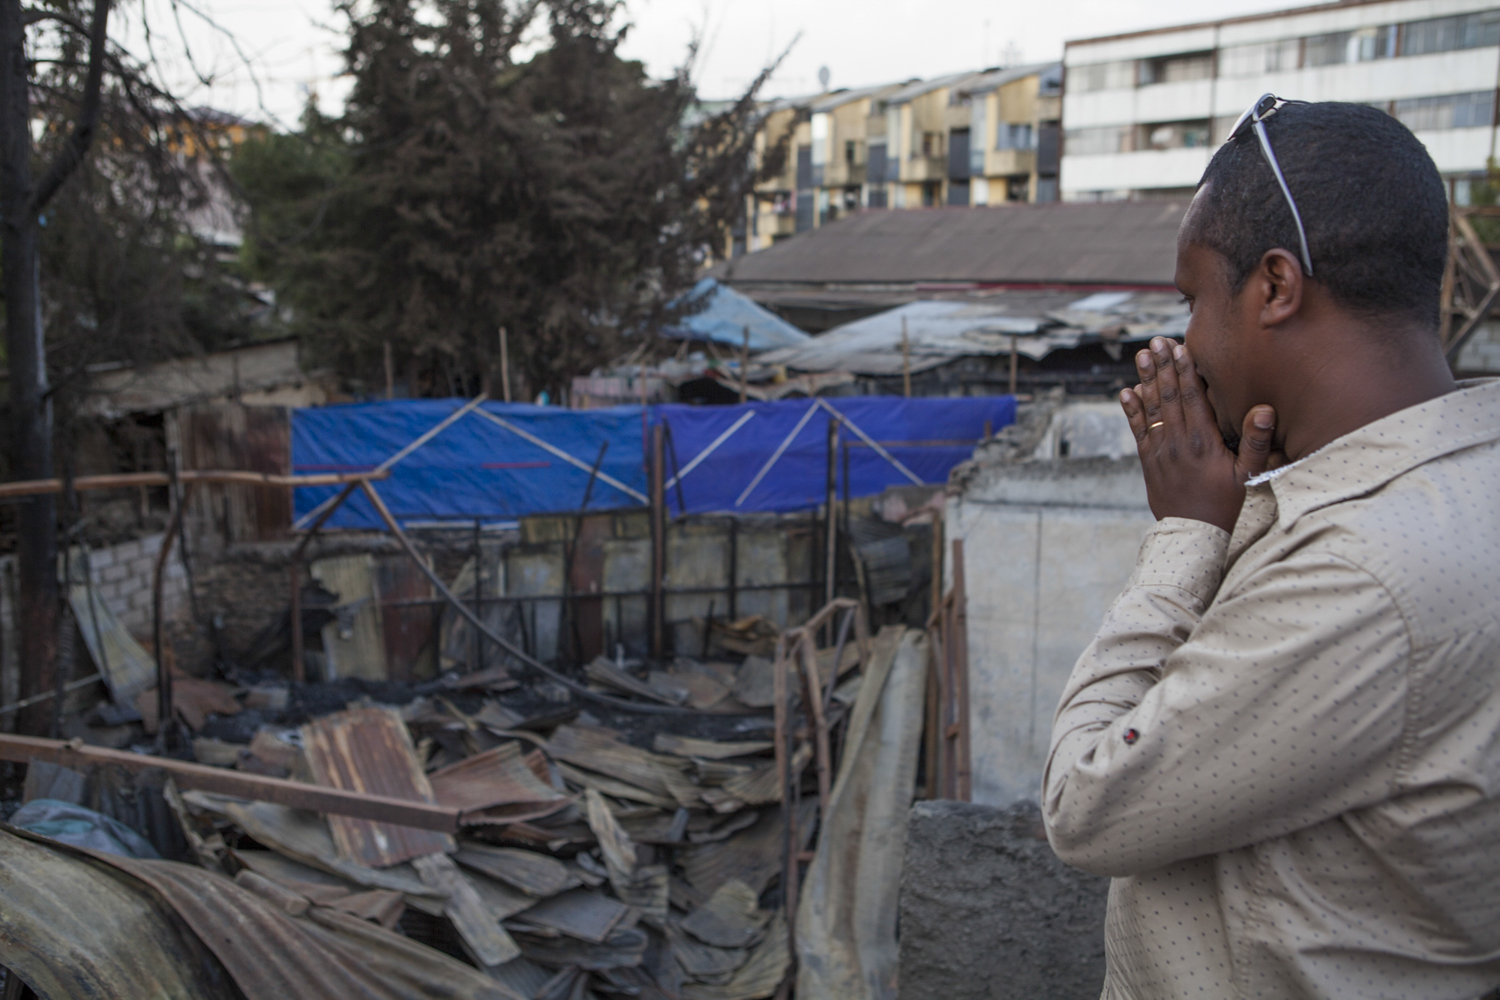  Misale Legesse, an Ethiopian jazz drummer, is pictured on 16 Feb 2015 surveying the damage from the fire that ripped through Jazzamba, a jazz club in Addis Ababa, in mid Jan 2015. The club was inside the oldest hotel in the country, Taitu, which was